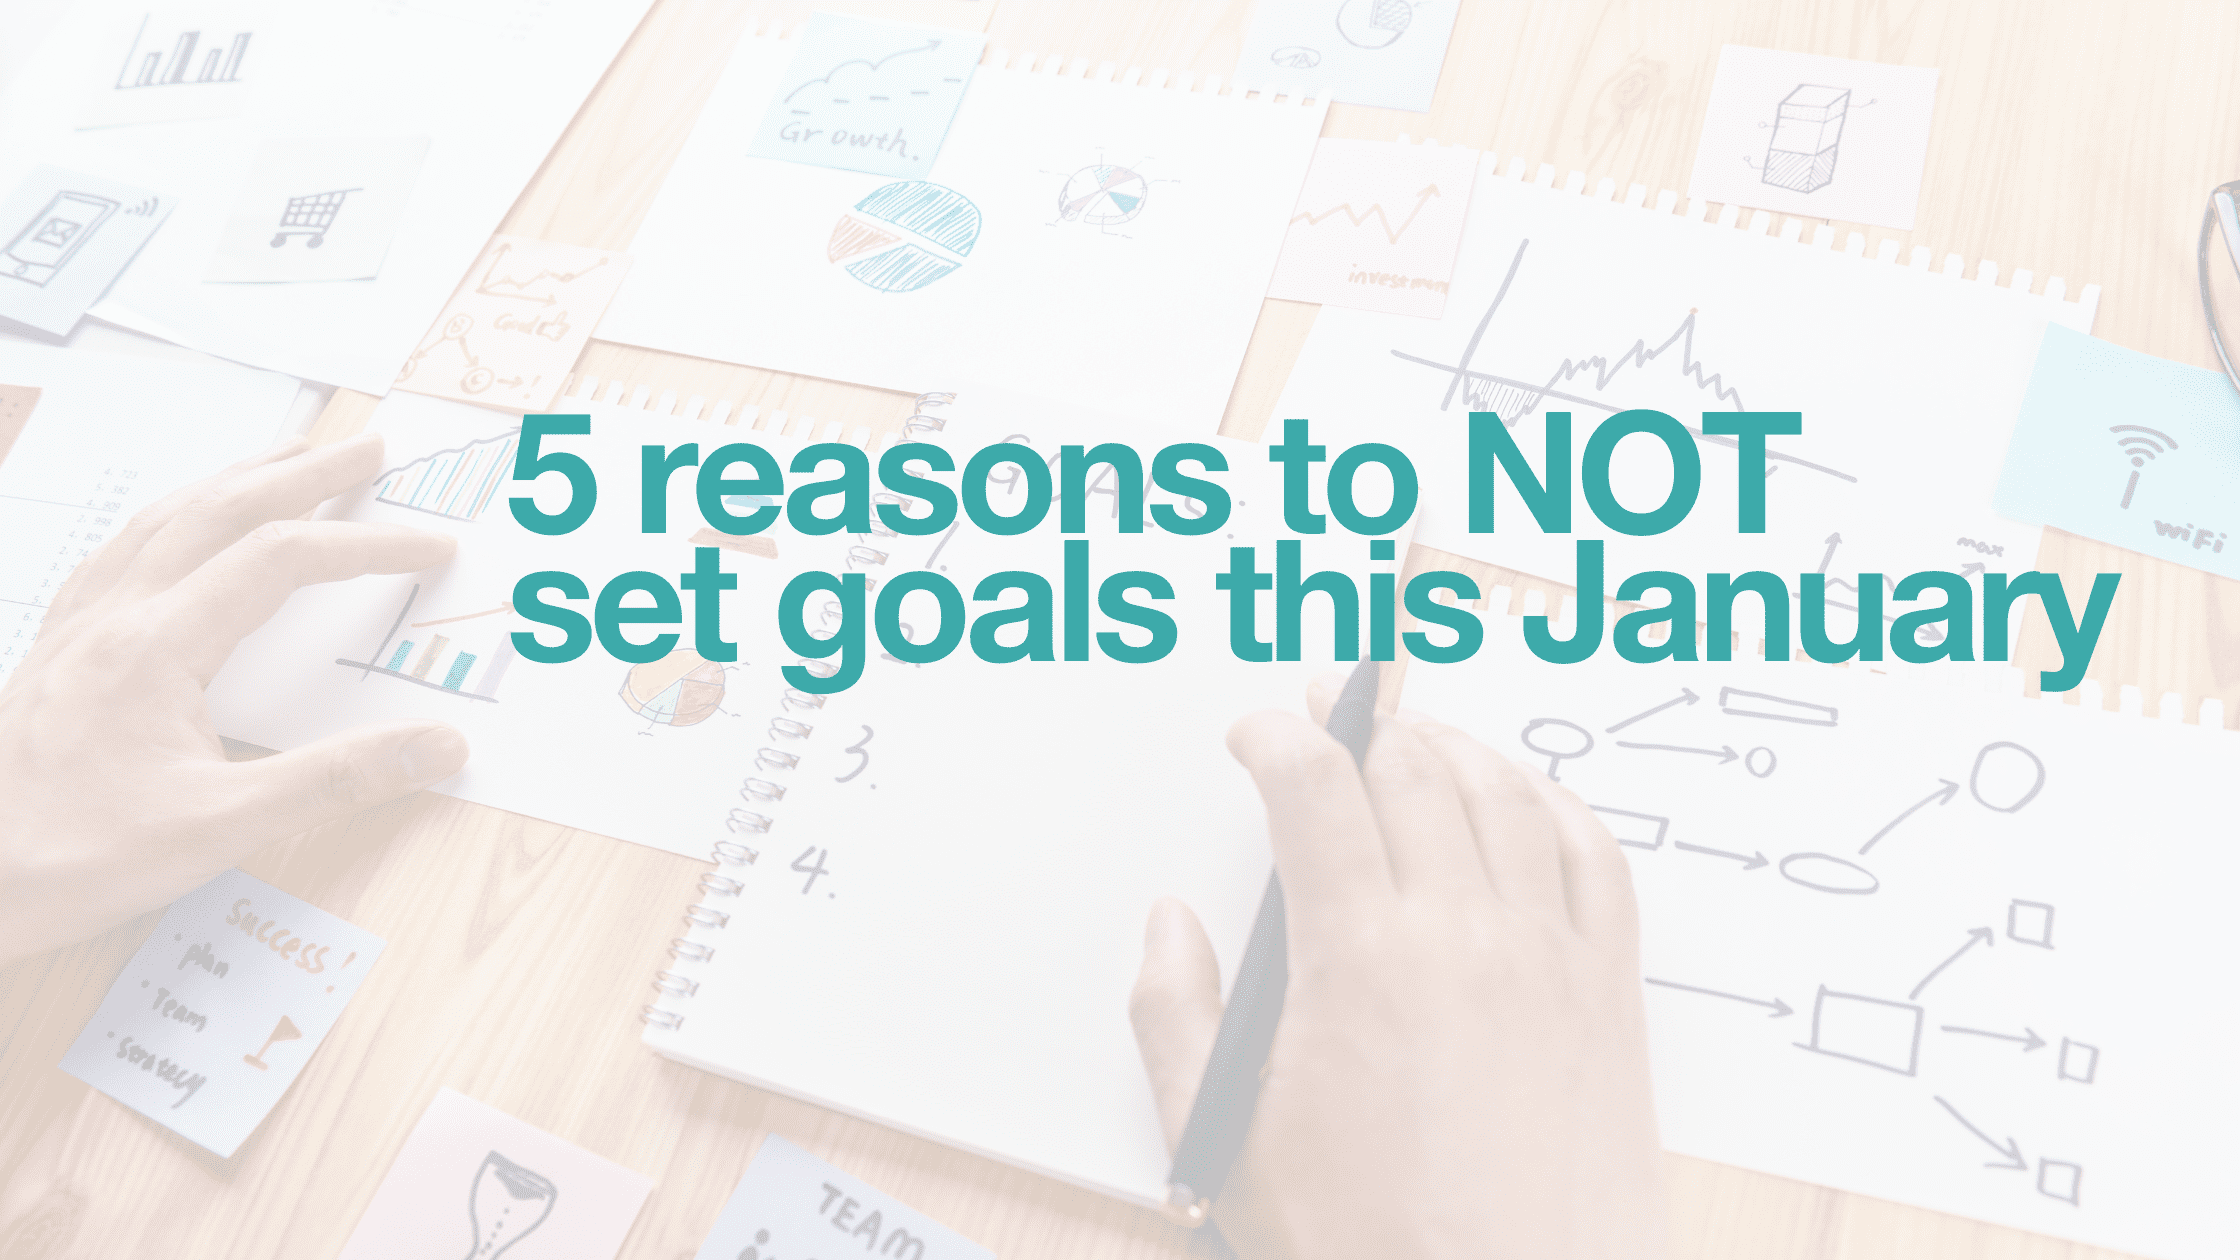 5 reasons to NOT set goals this January